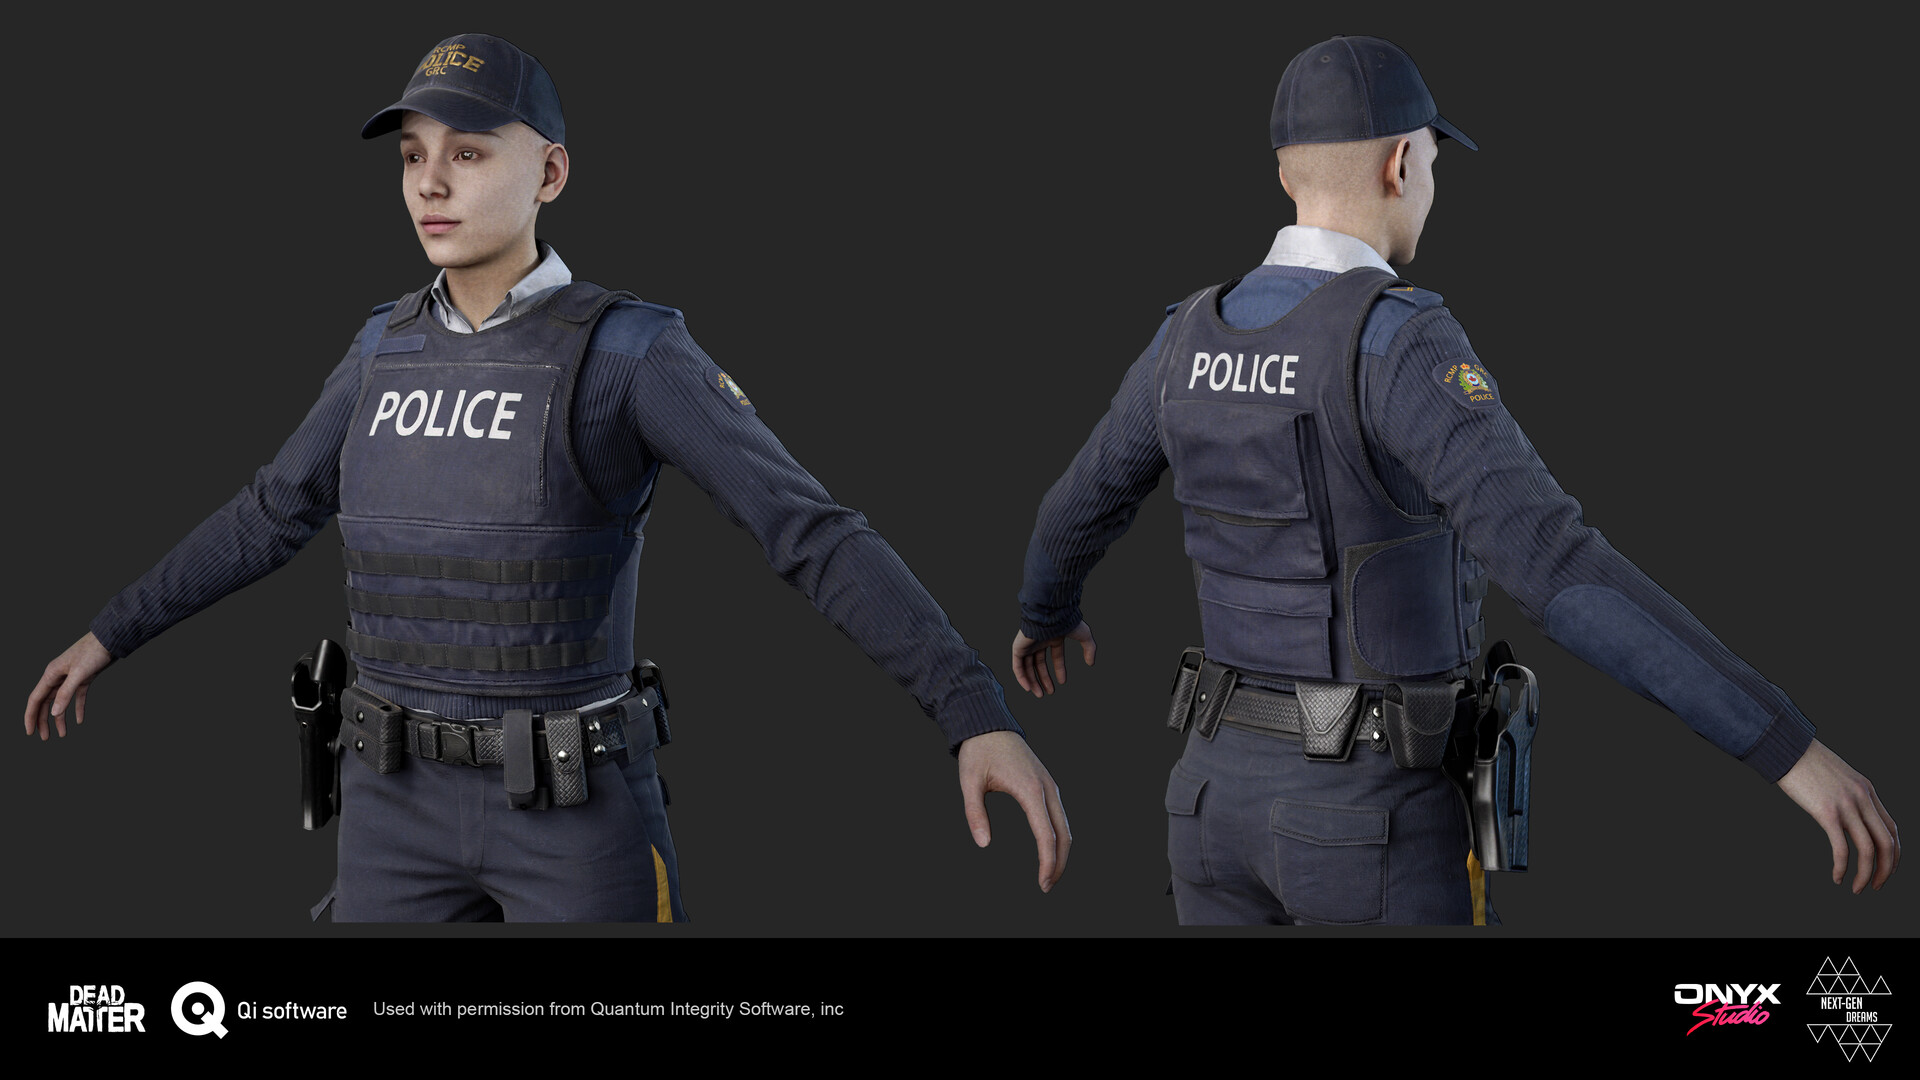 ArtStation - Female Police Character and Outfit Dead Matter